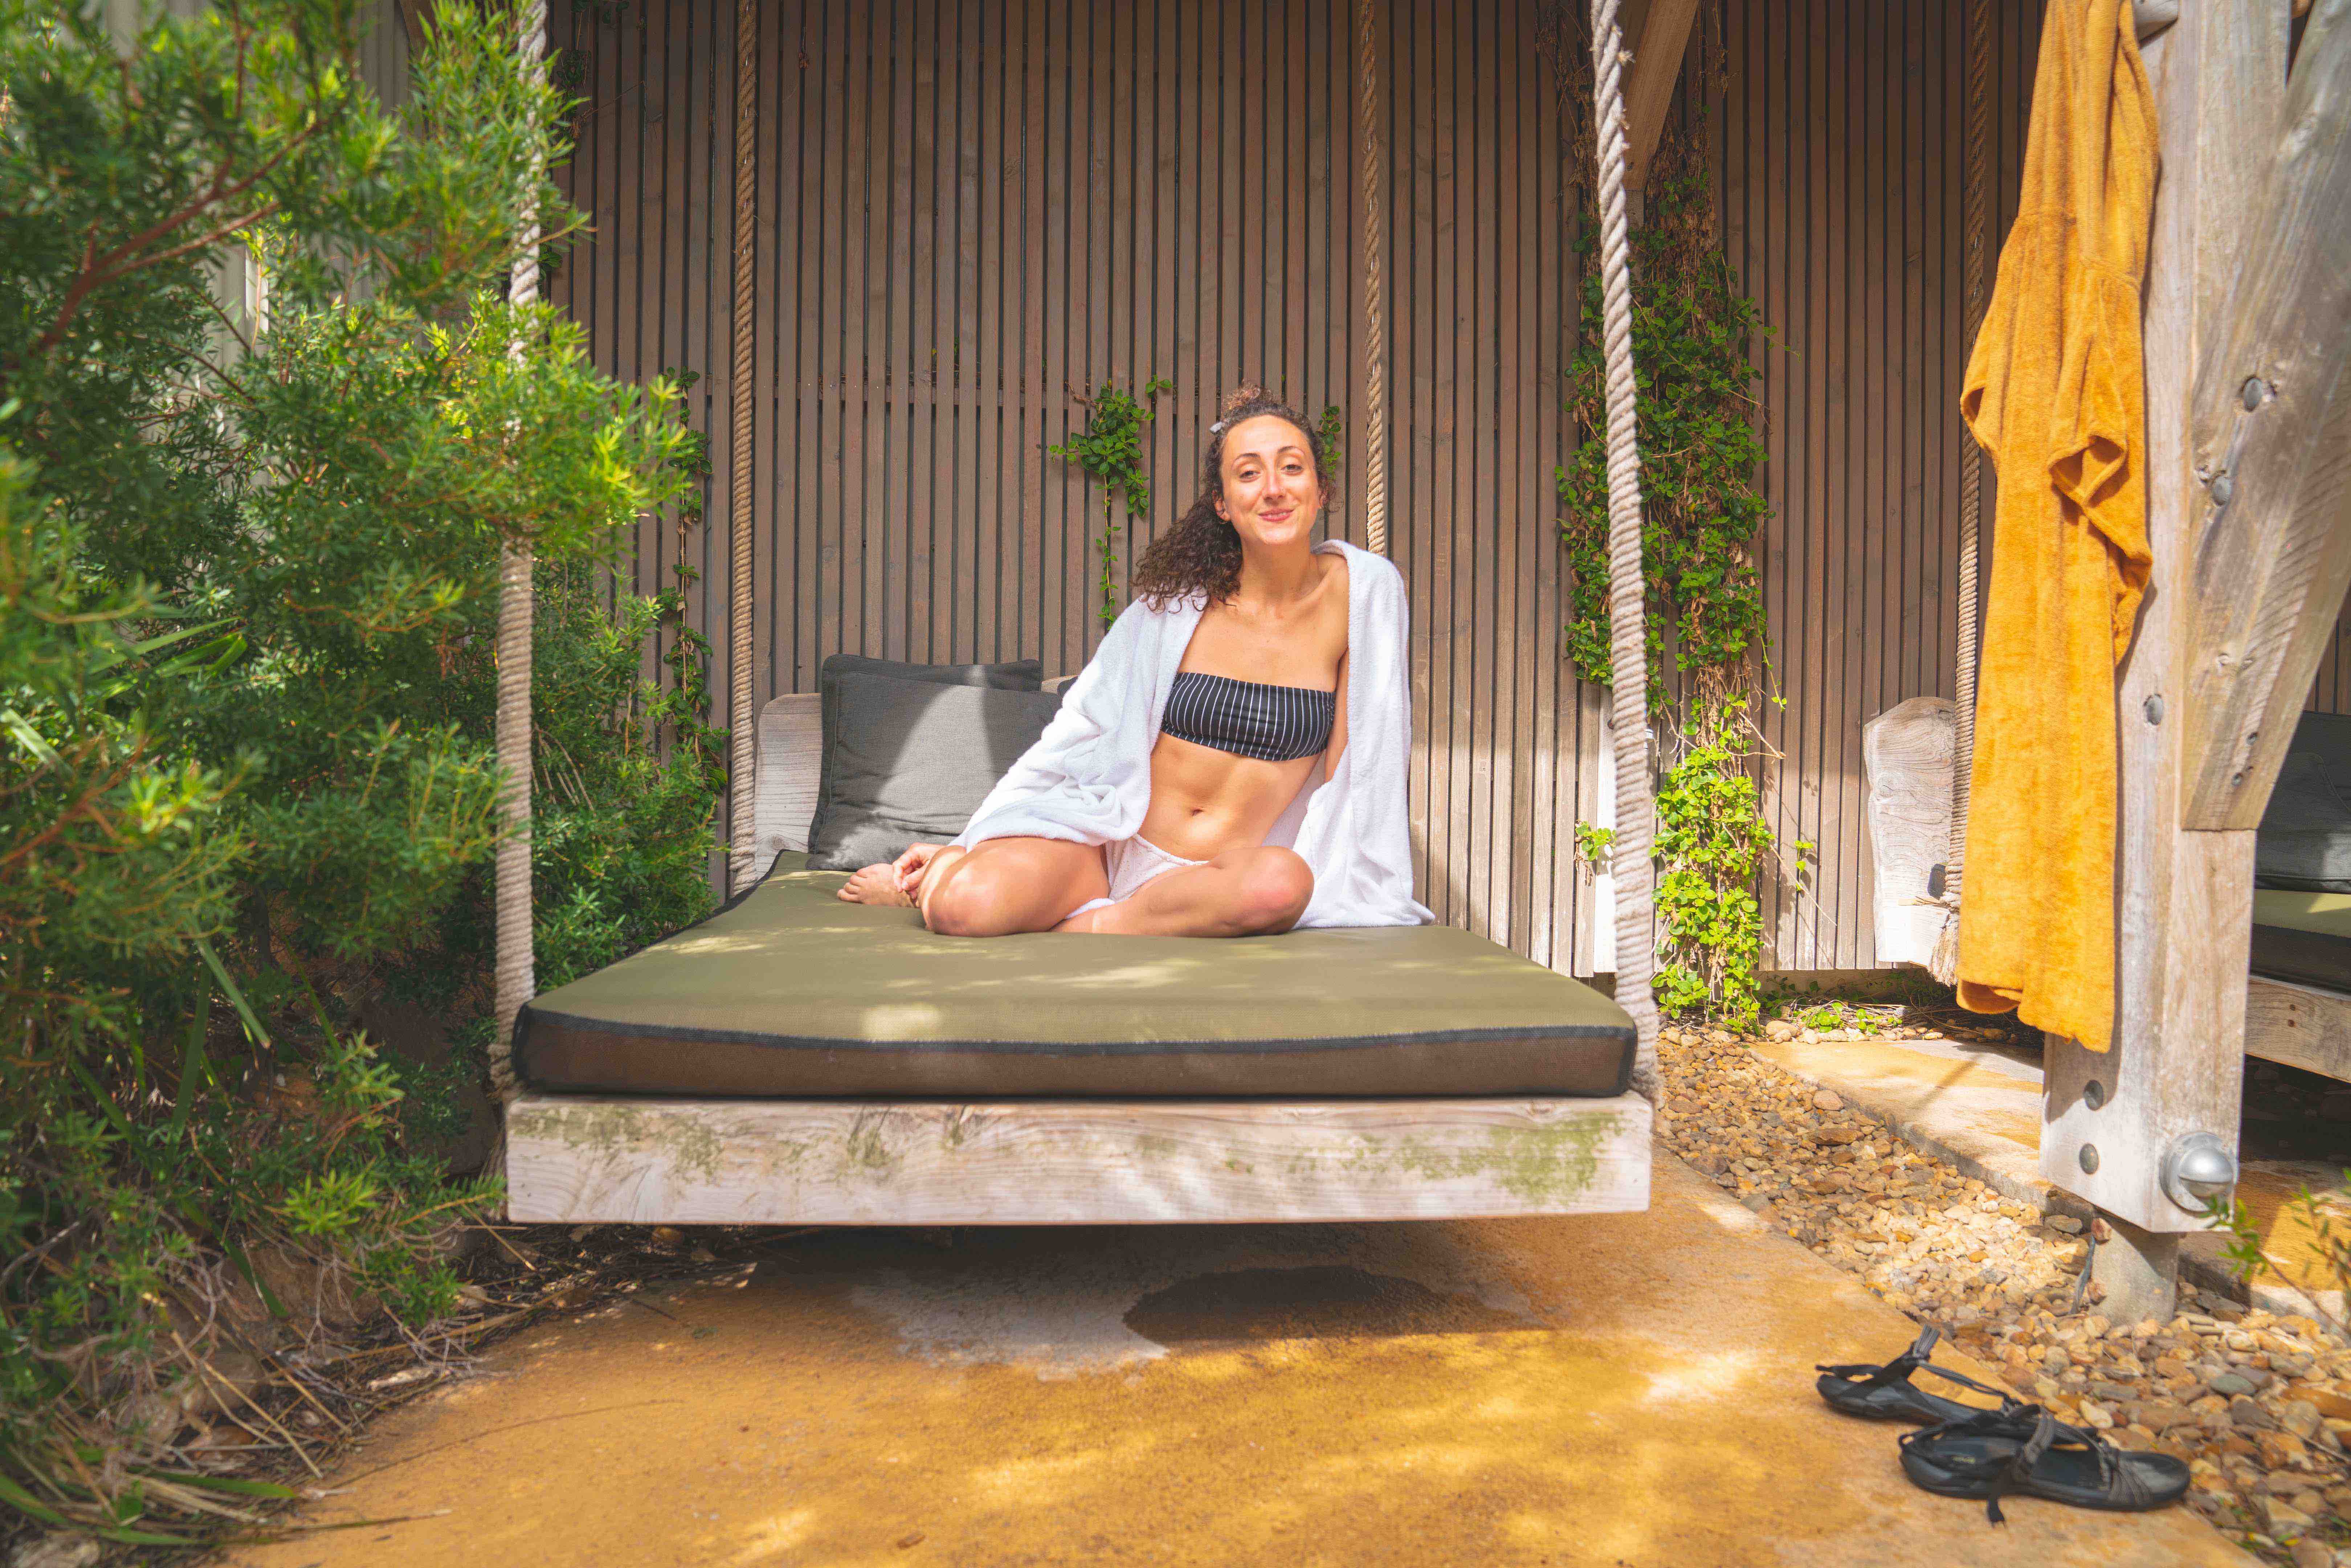 How to Spend a Weekend in the Mornington Peninsula: Hot Springs, Hiking & Wineries